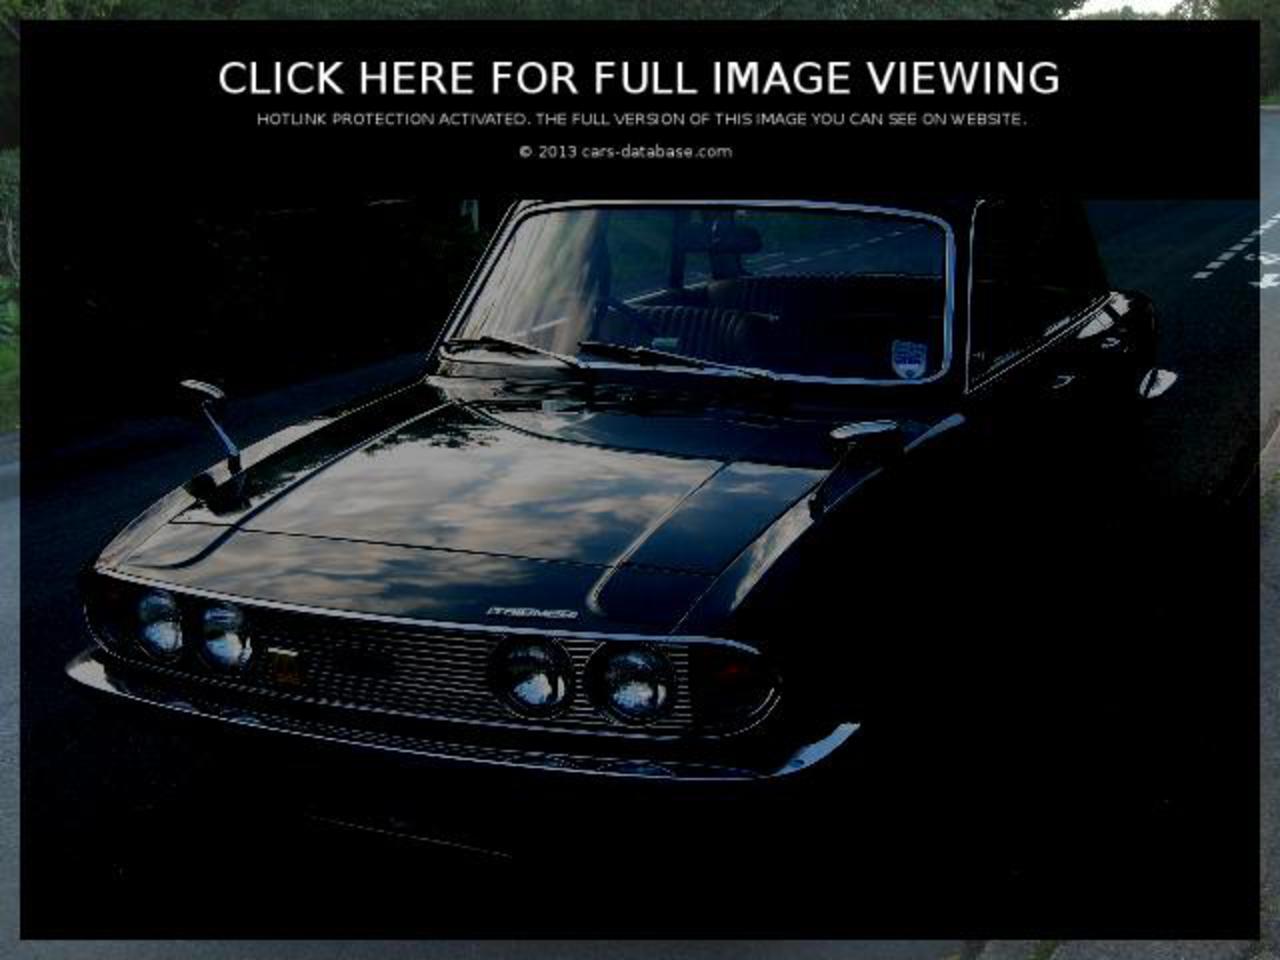 Triumph 2000 MK II: Information about model, images gallery and ...